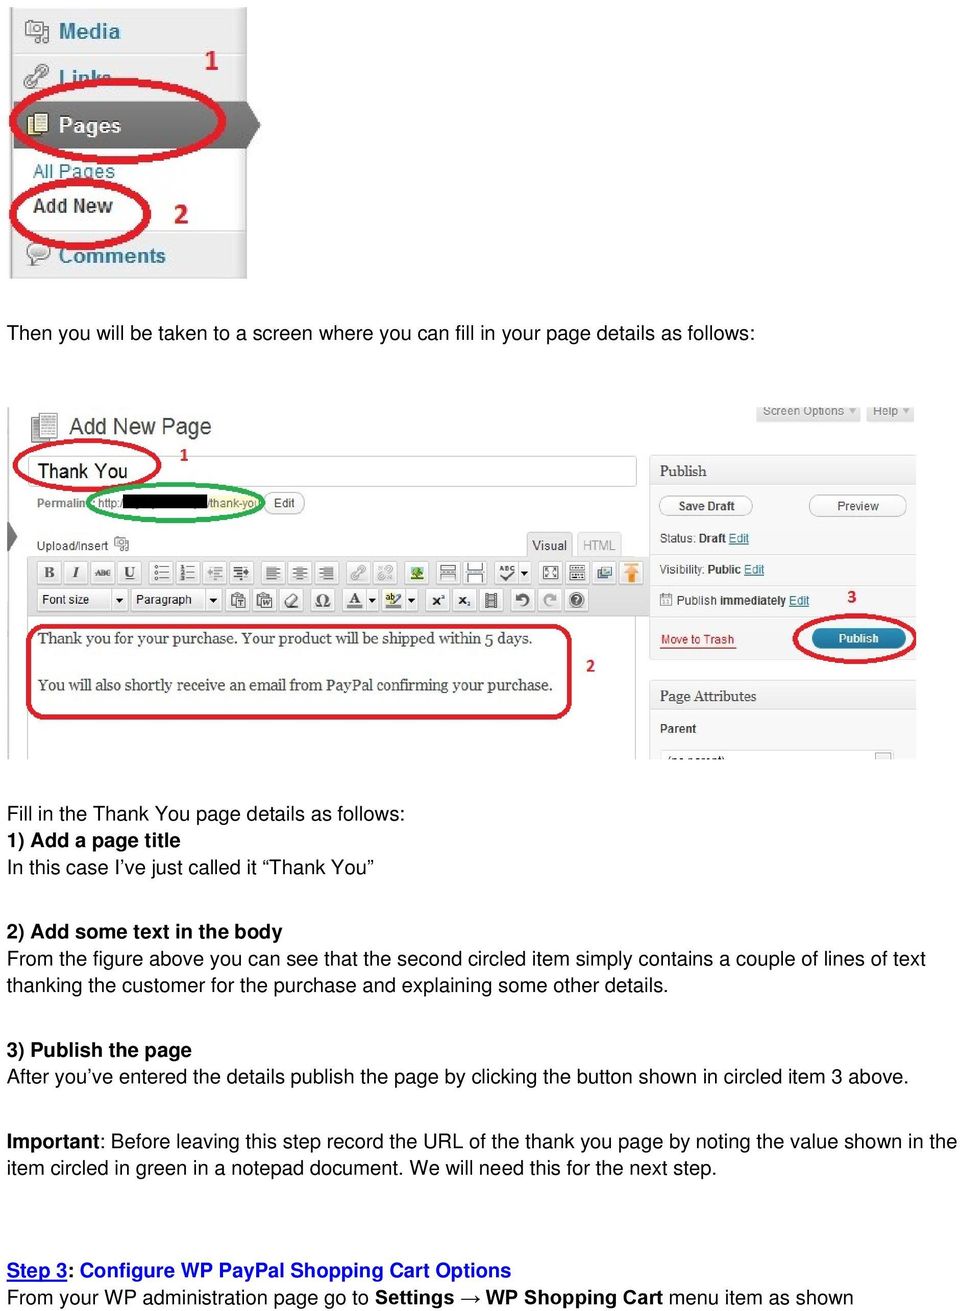 details. 3) Publish the page After you ve entered the details publish the page by clicking the button shown in circled item 3 above.